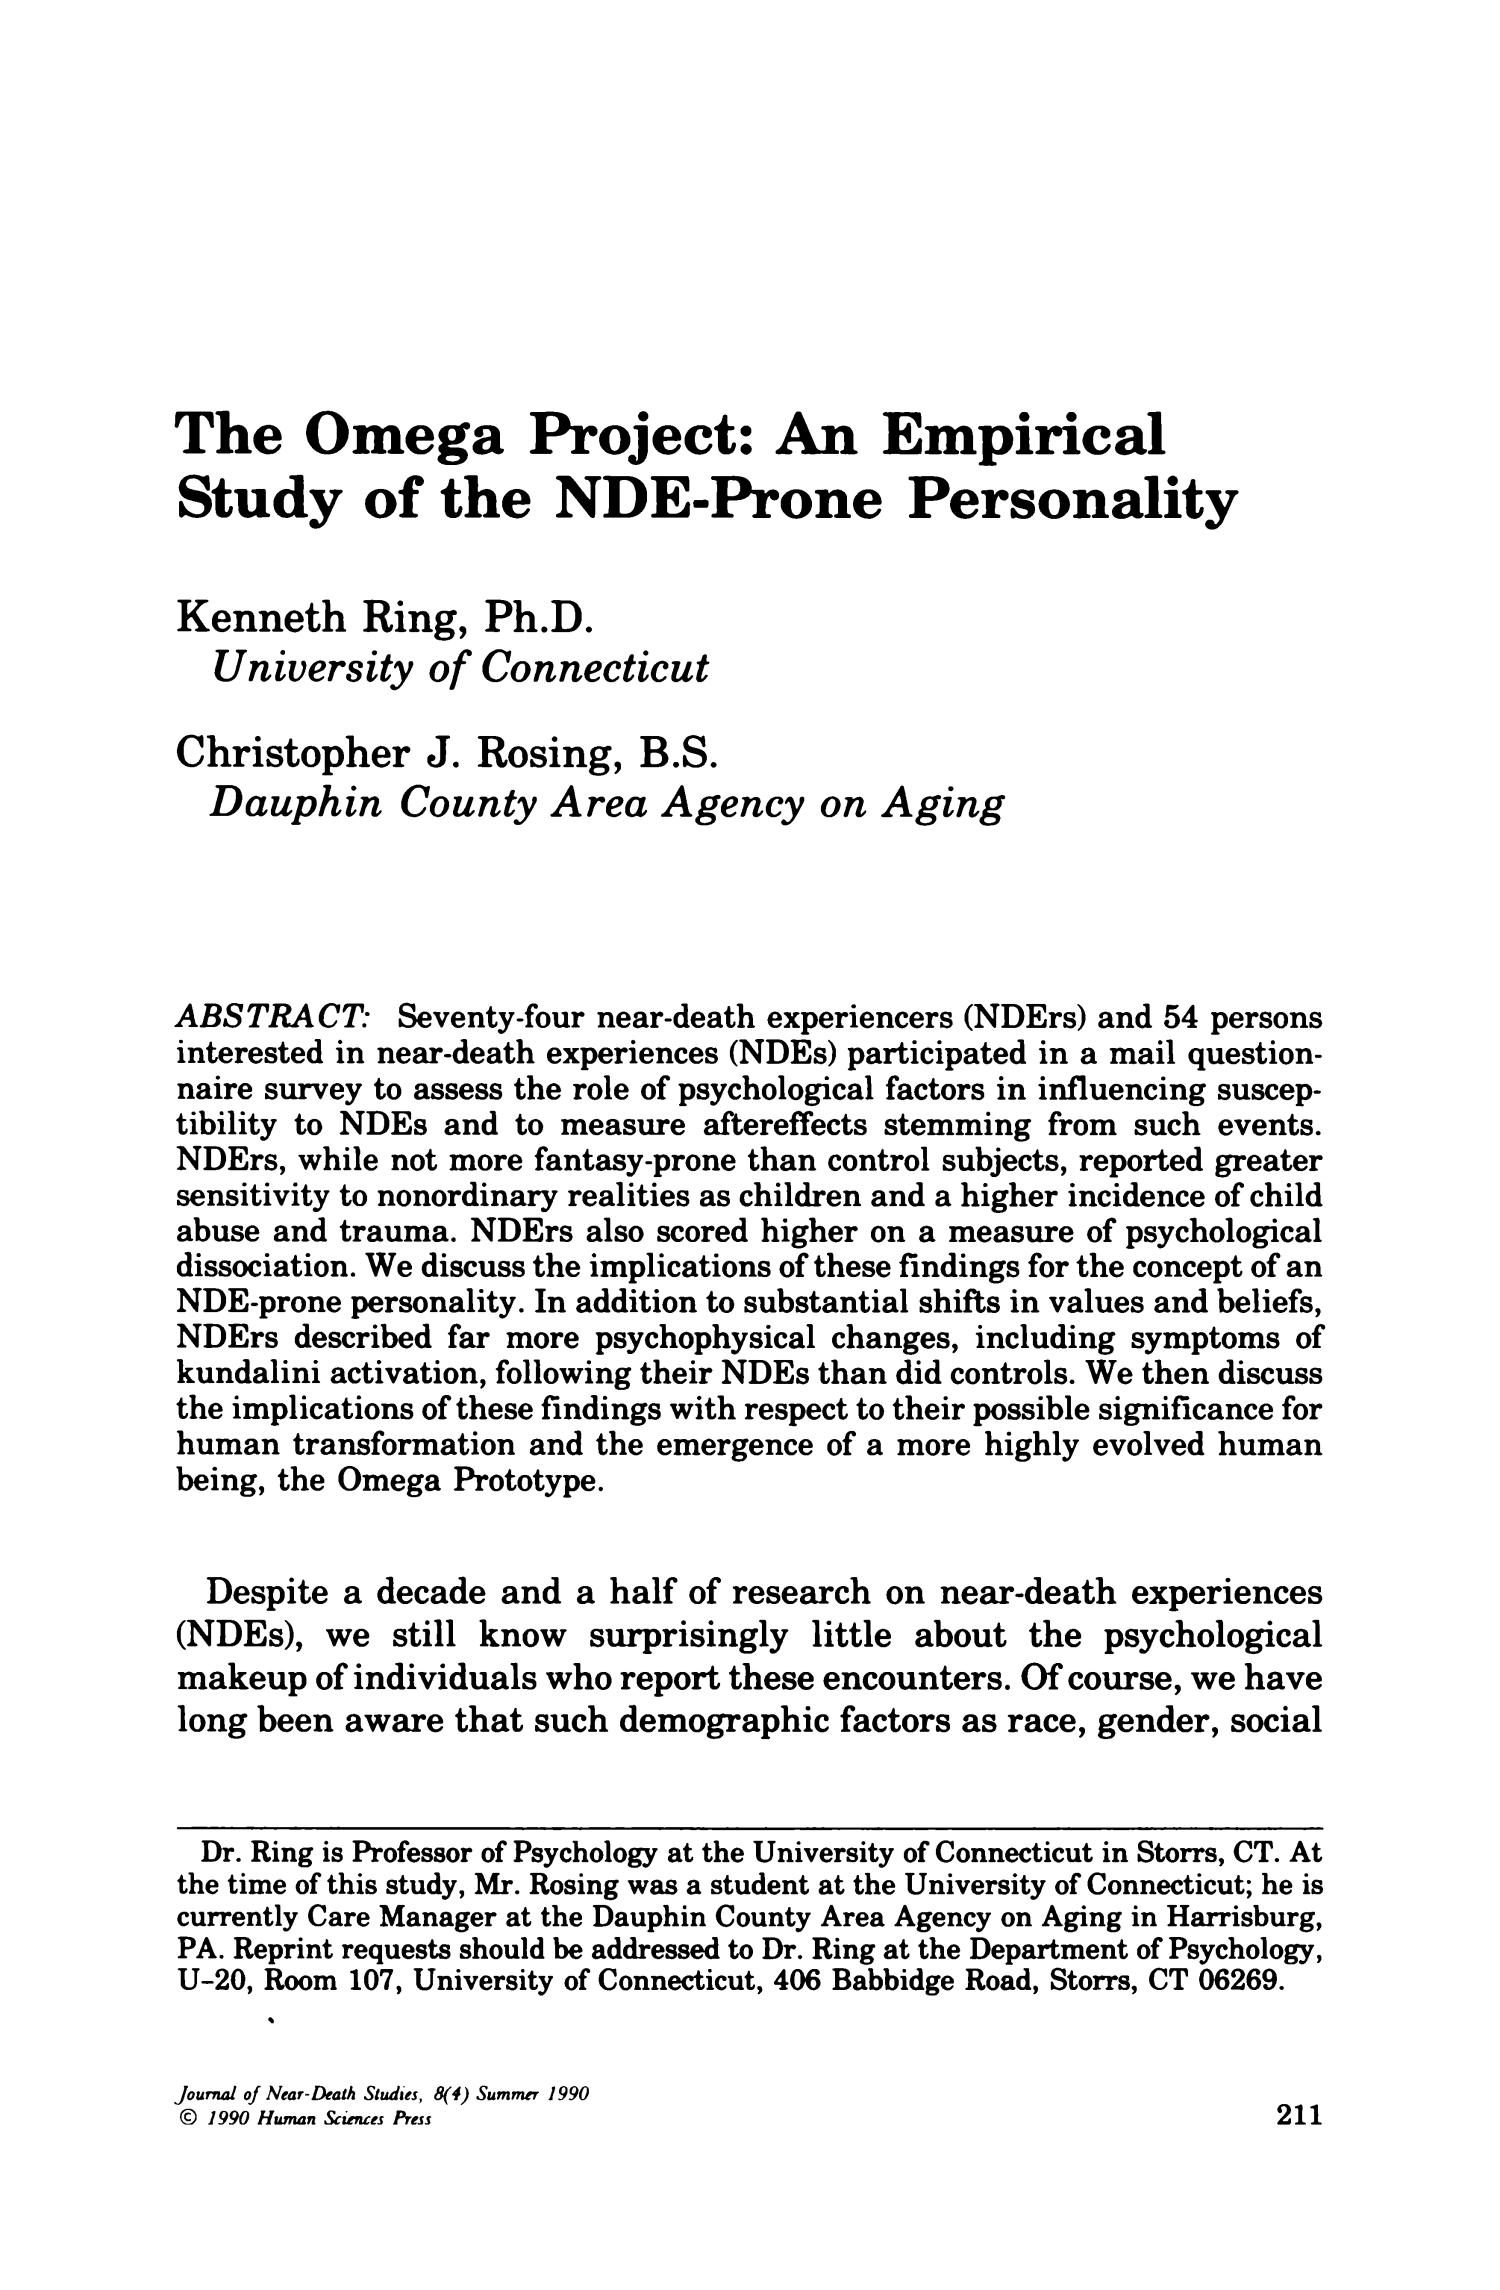 The Omega Project: An Empirical Study of the NDE-Prone Personality - UNT  Digital Library